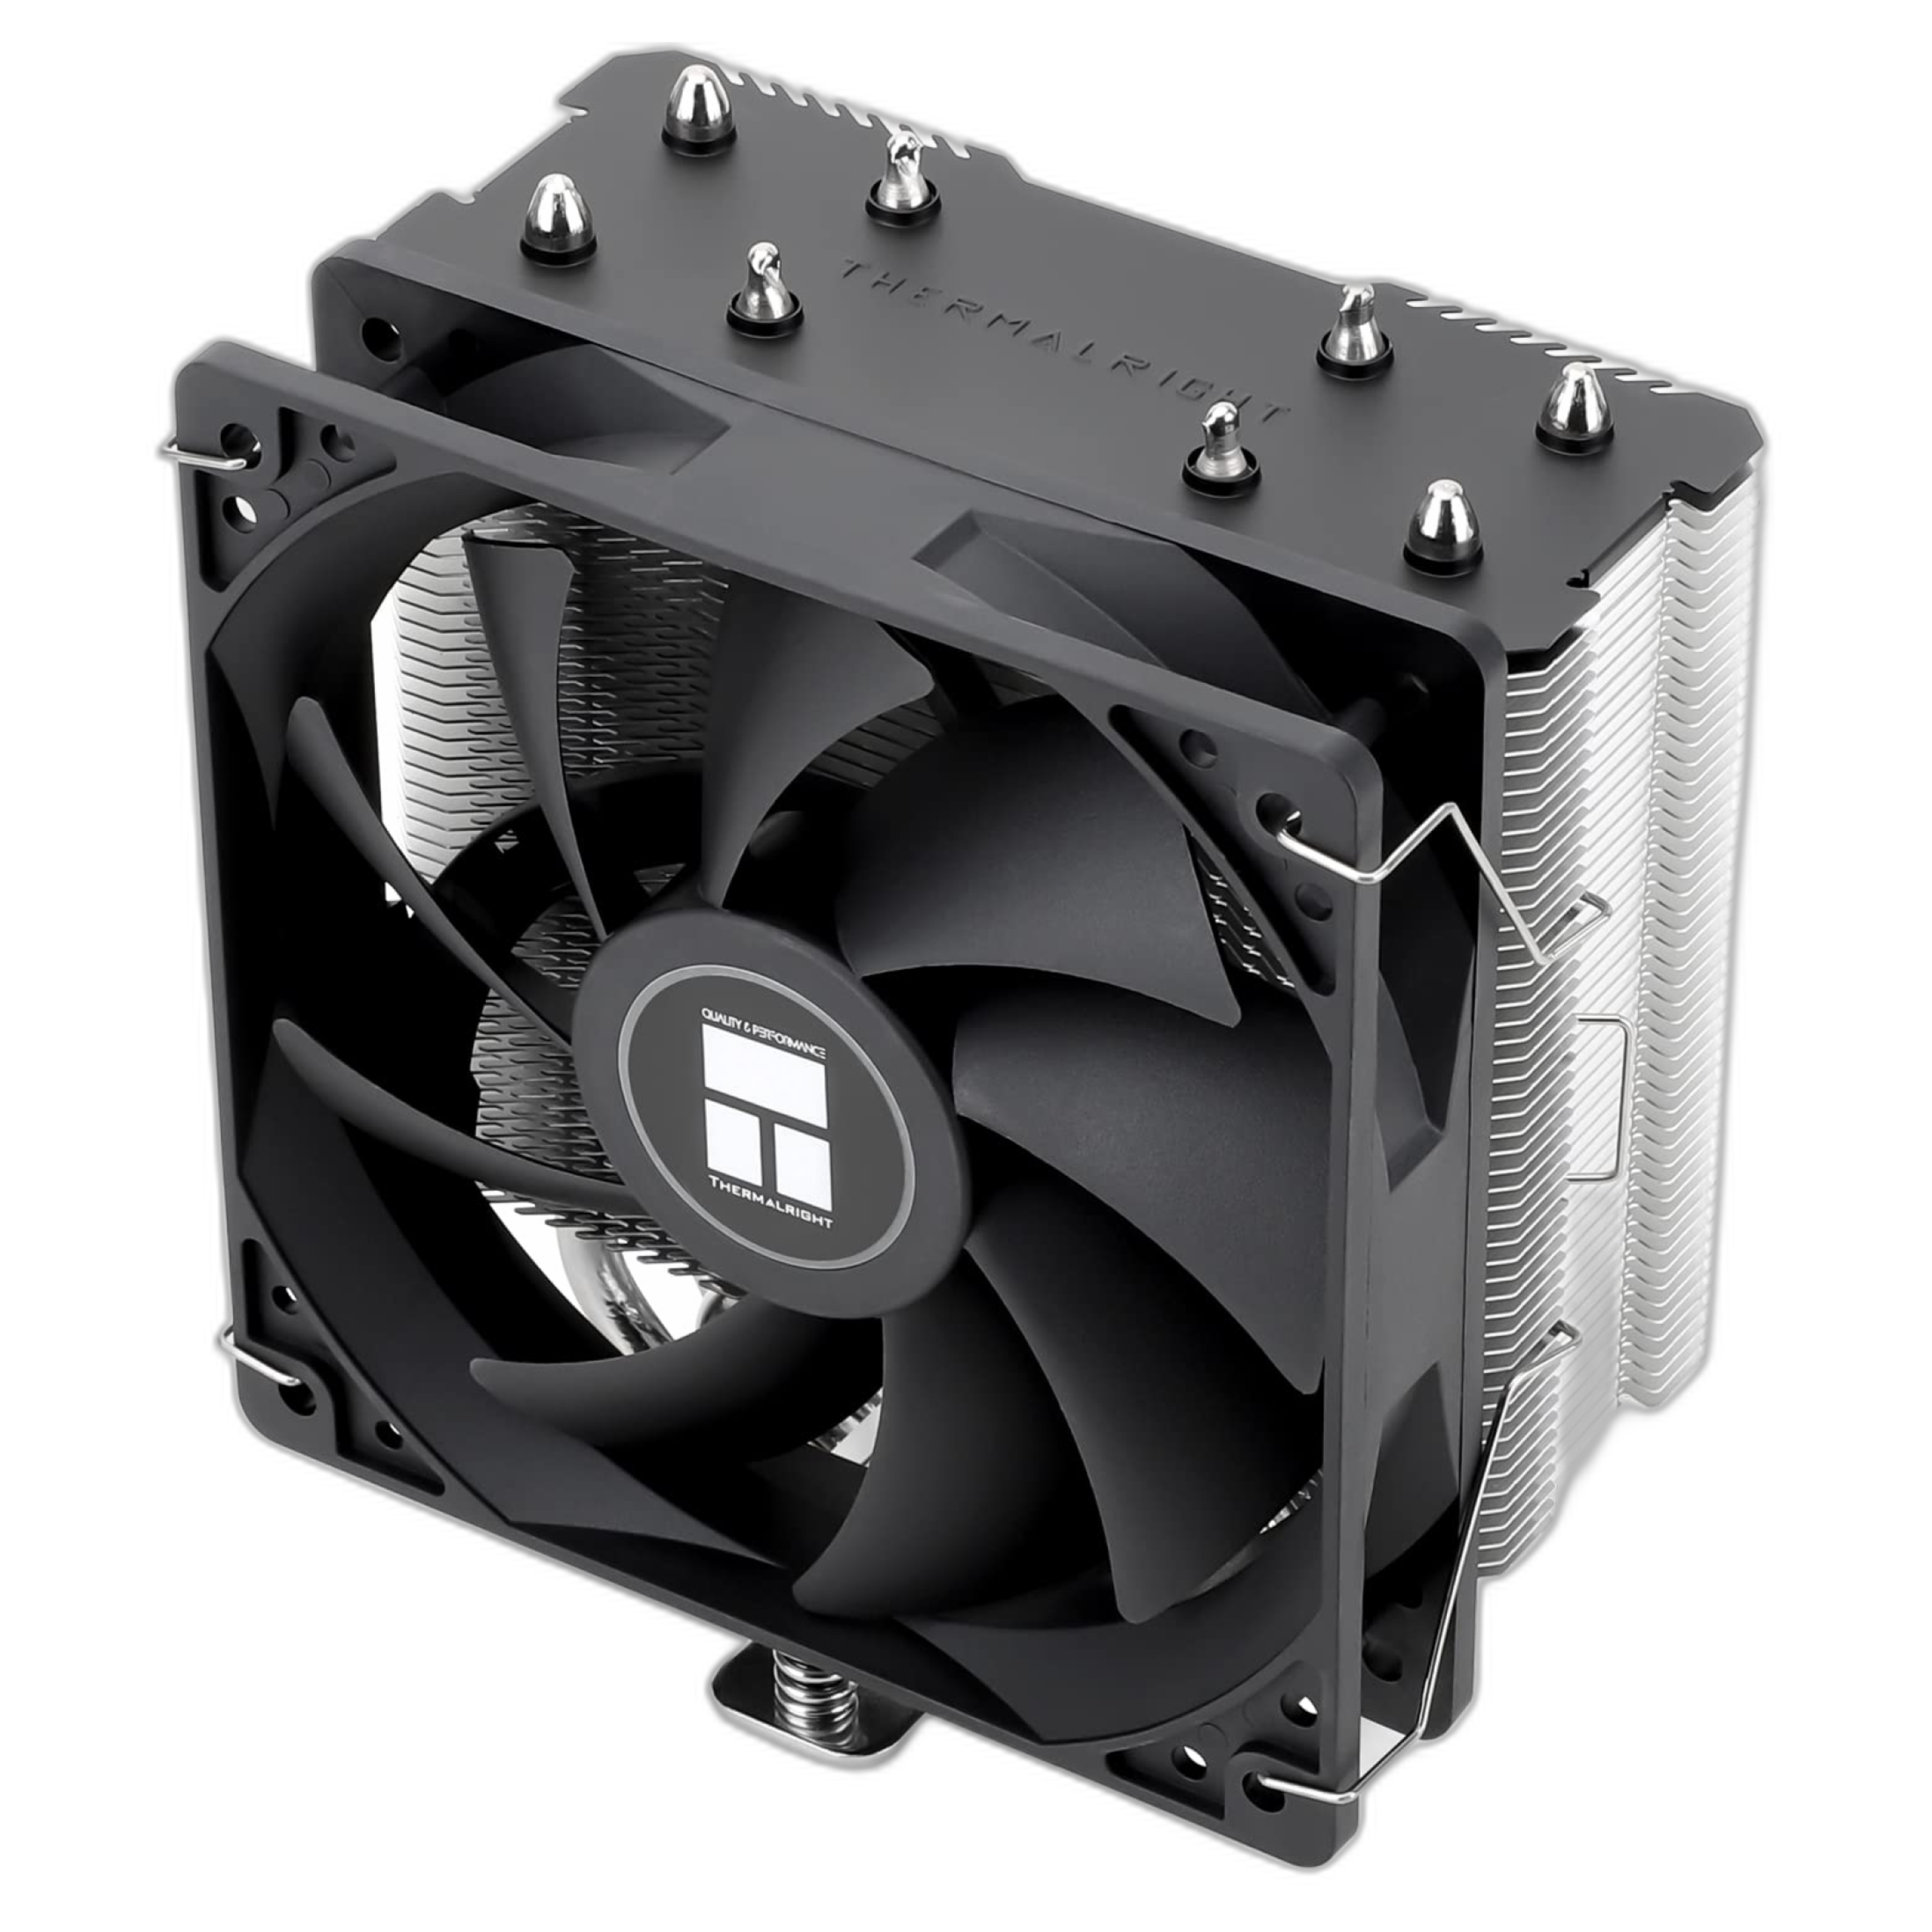 Thermalright's Assassin X120 CPU cooler.